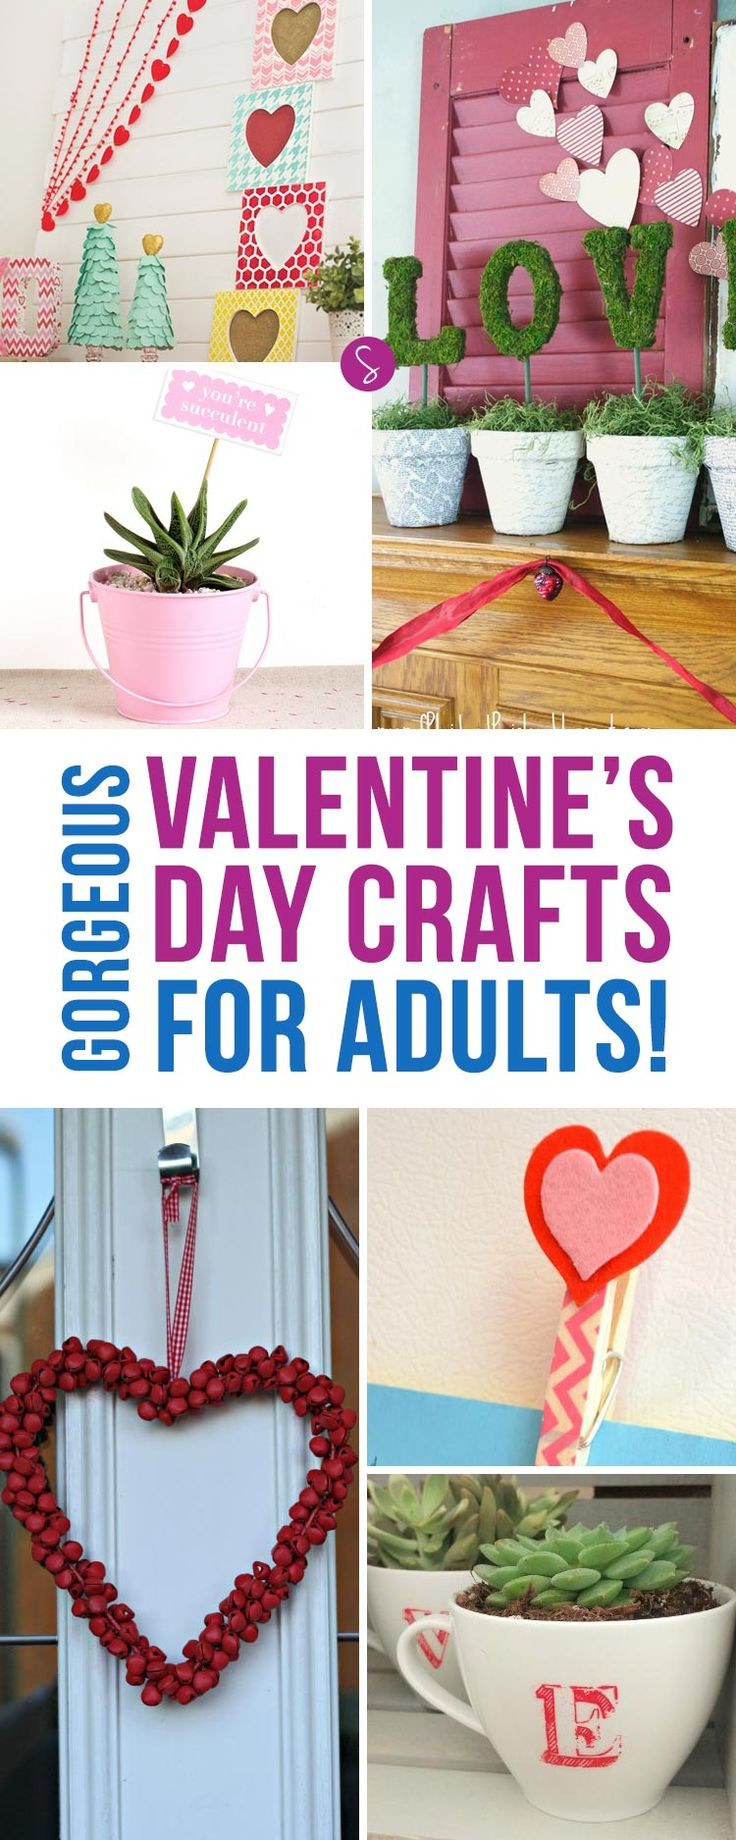 Mother's Day Crafts For Adults
 370 best images about Valentine s Day on Pinterest